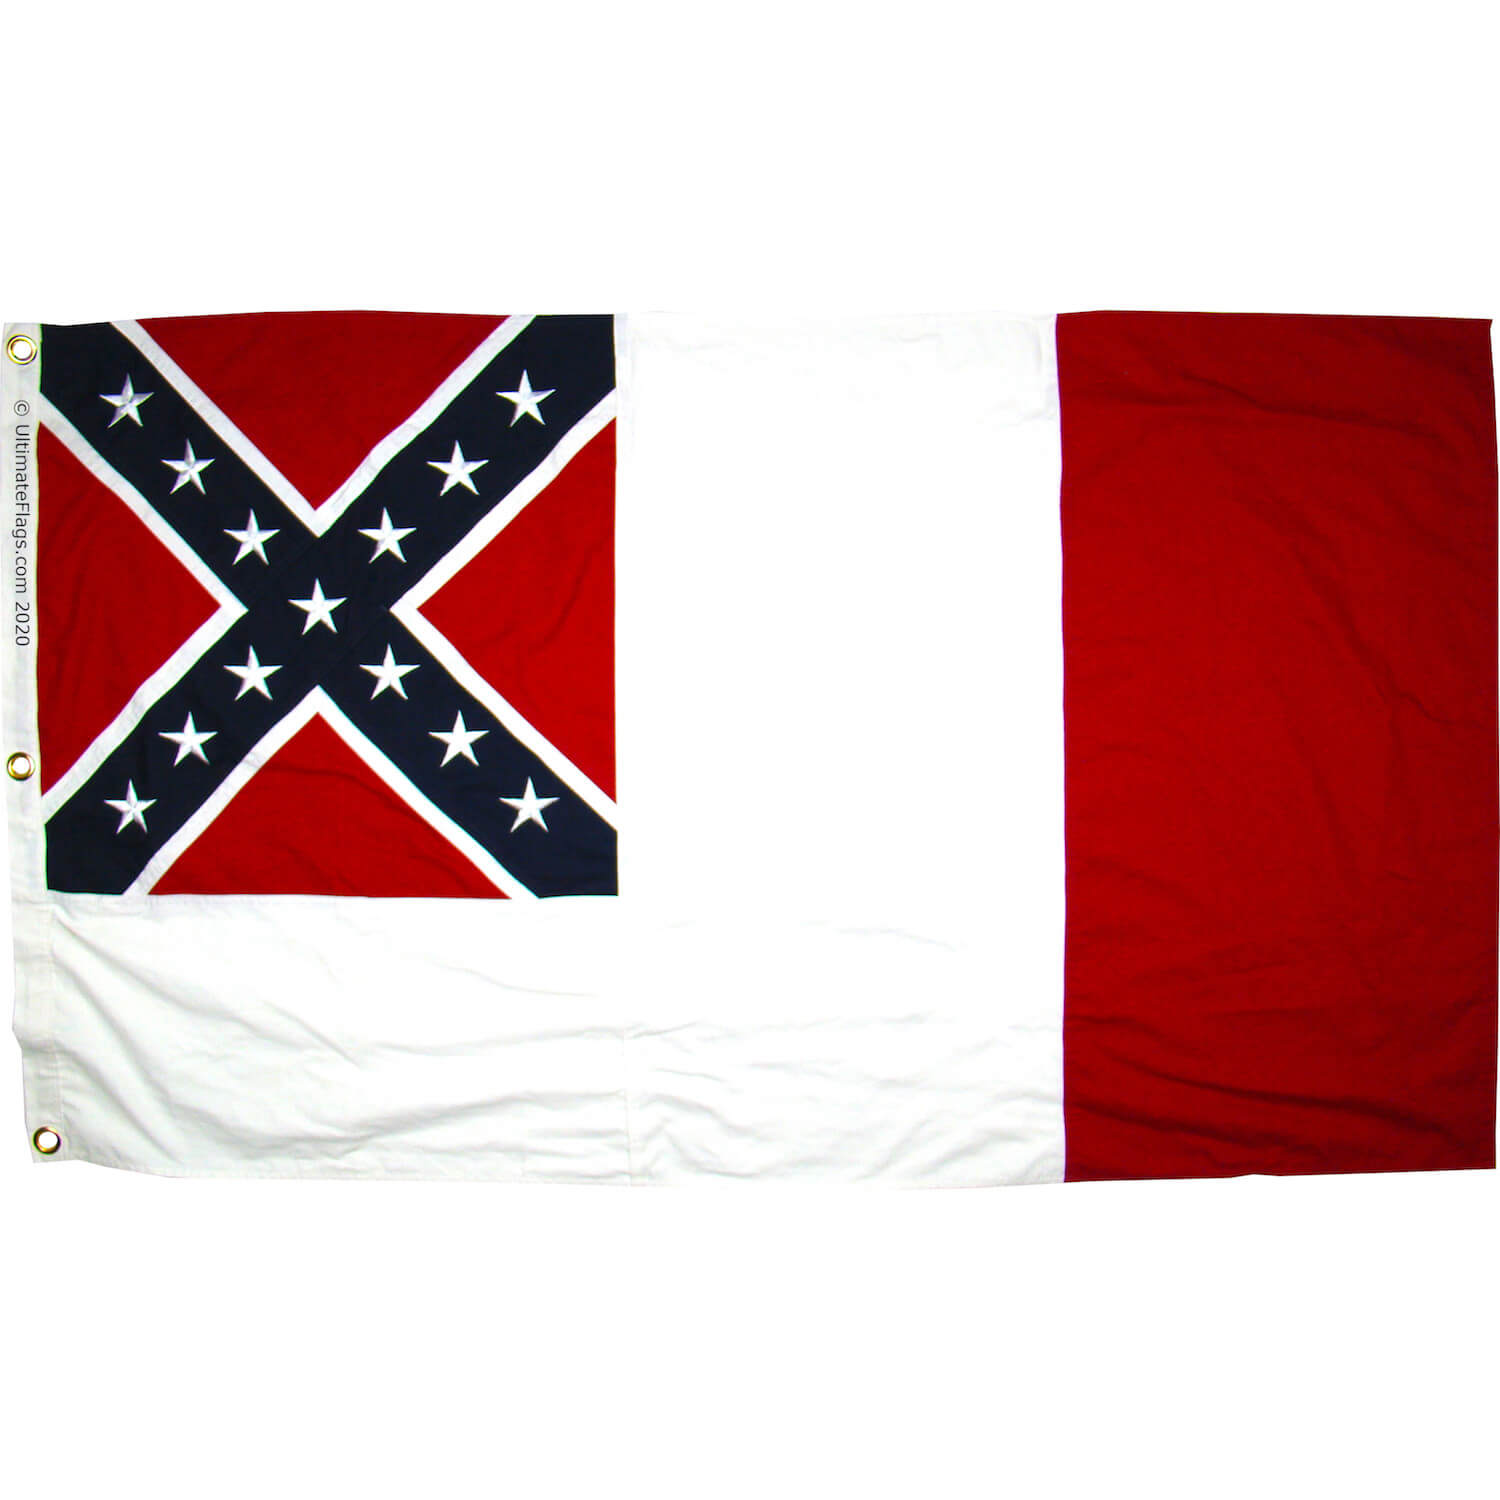 Celebrate Your Heritage with Ultimate Flags Inc